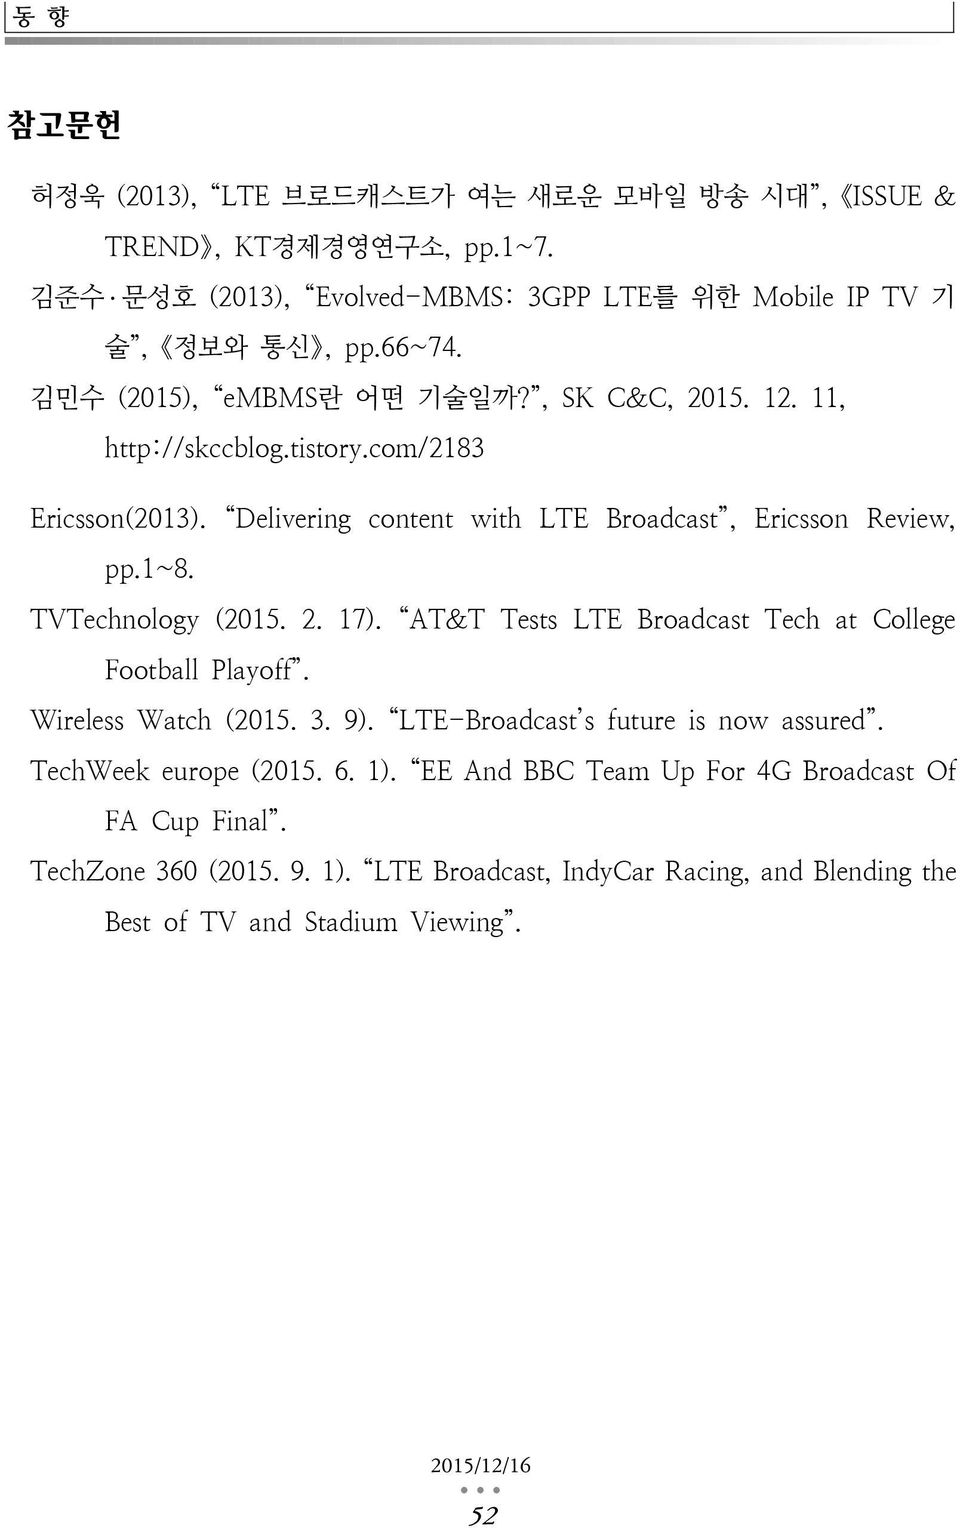 TVTechnology (2015. 2. 17). AT&T Tests LTE Broadcast Tech at College Football Playoff. Wireless Watch (2015. 3. 9). LTE-Broadcast s future is now assured.